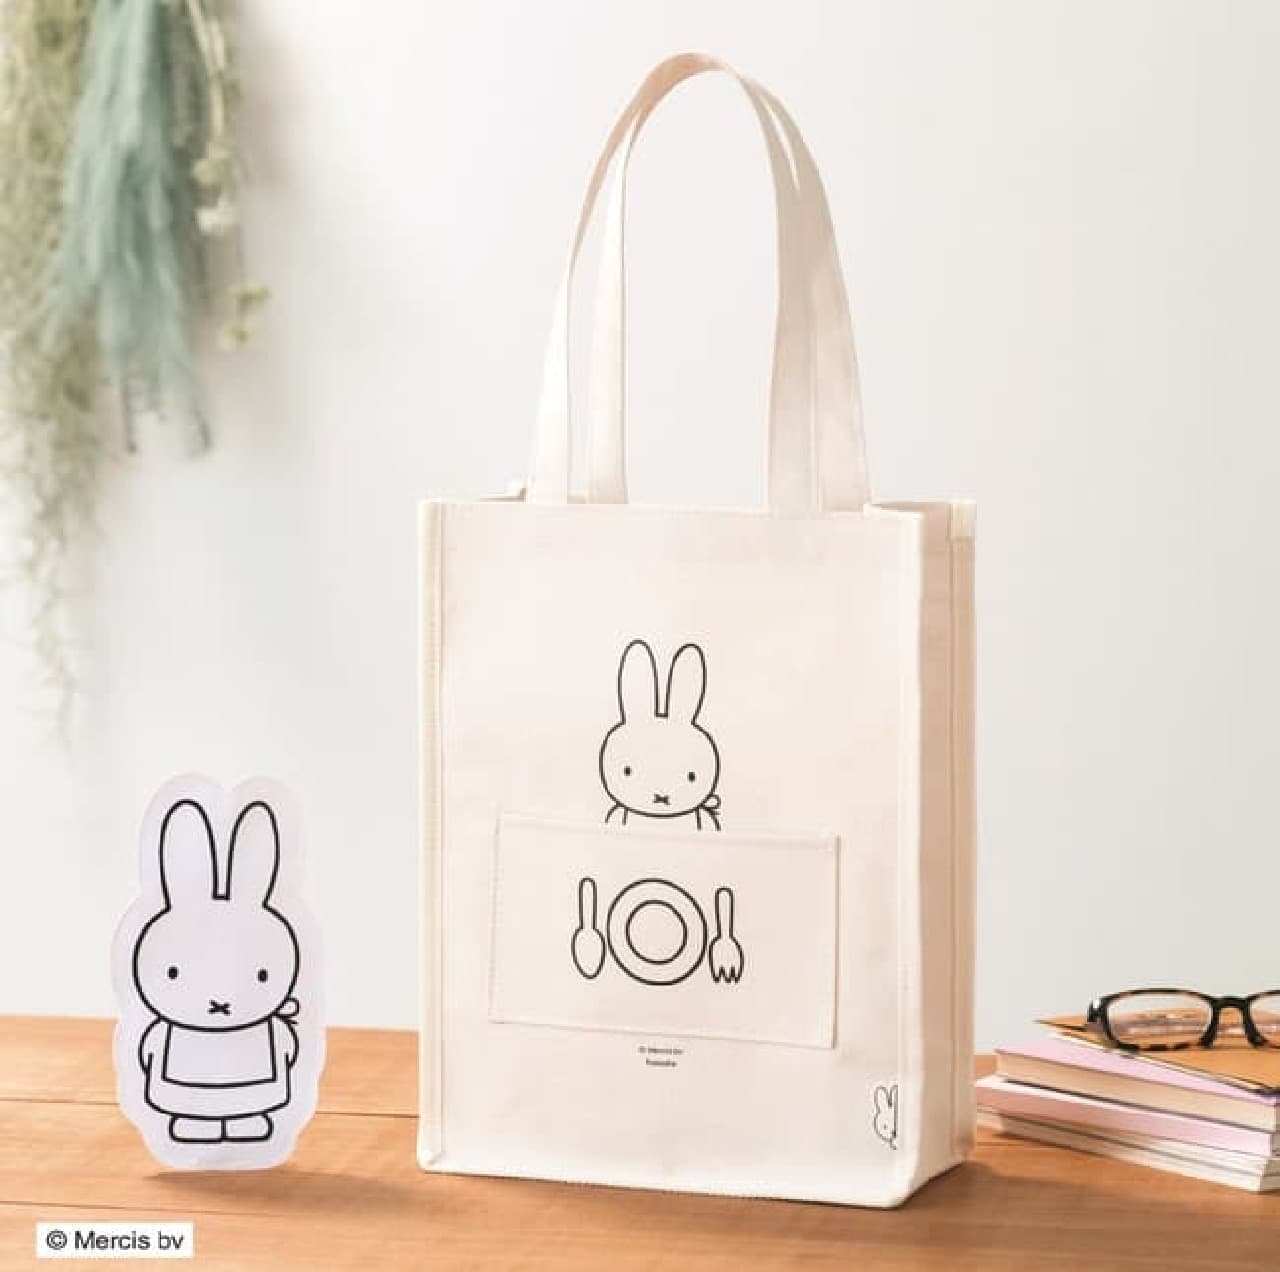 cookpad plus Spring 2022 -- Miffy-Pattern Tote Bag and More!